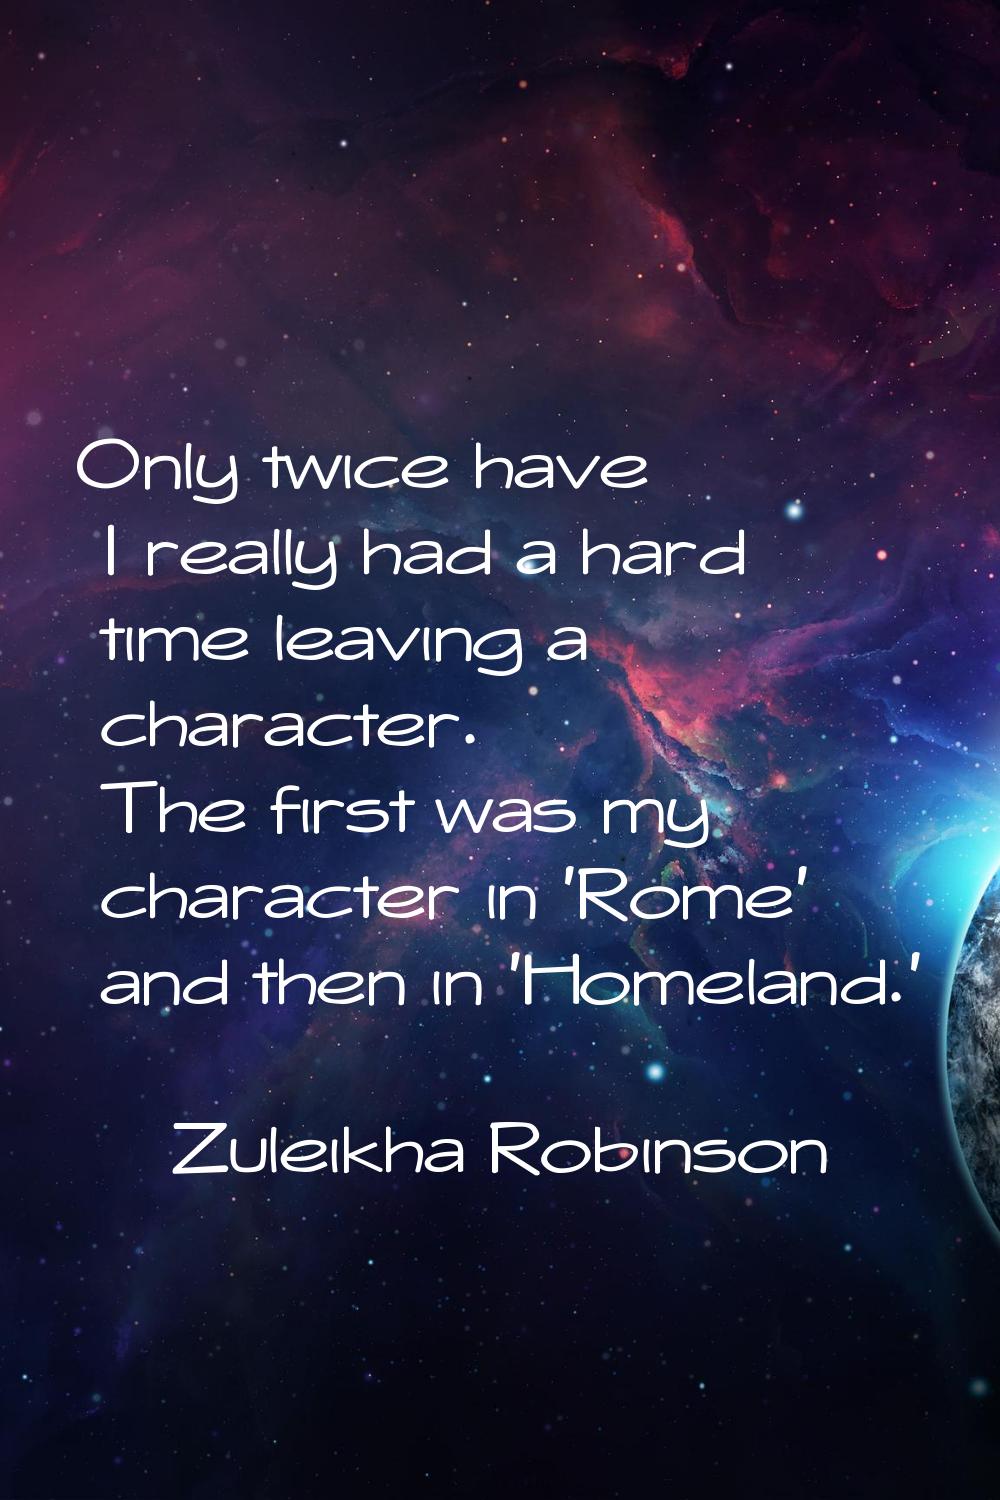 Only twice have I really had a hard time leaving a character. The first was my character in 'Rome' 